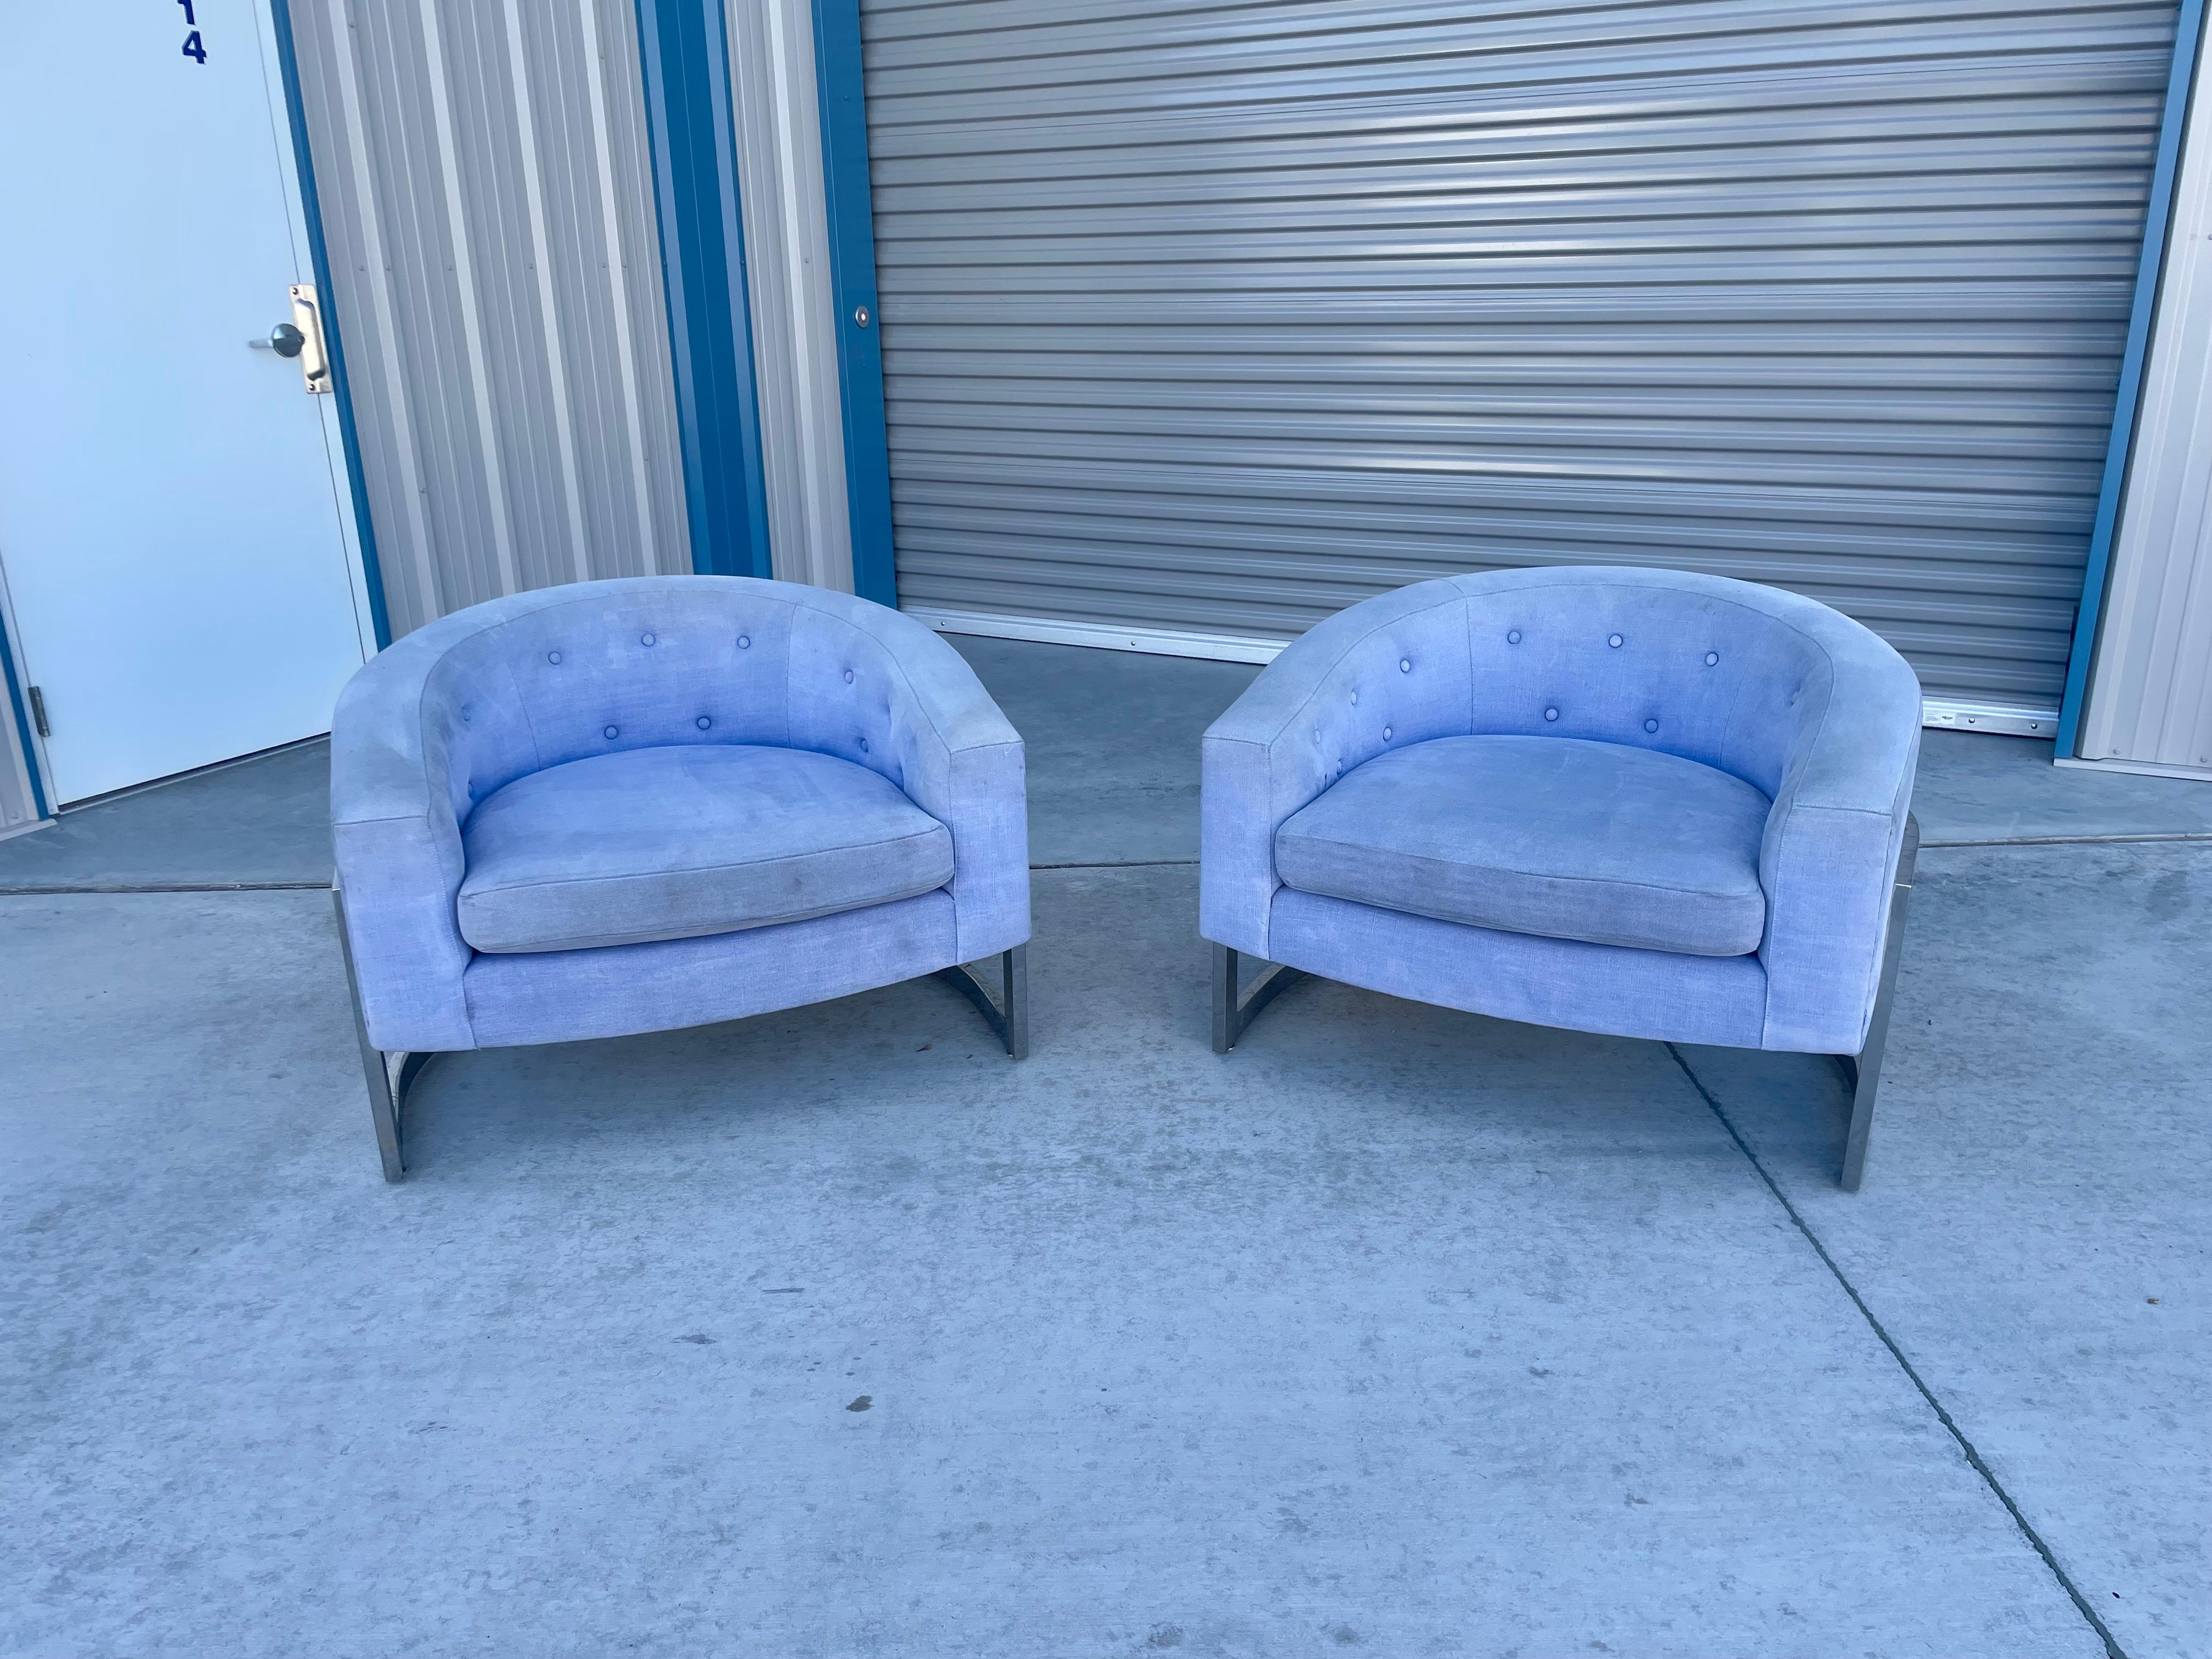 American 1970s Mid Century Lounge Chairs Styled After Milo Baughman - a Pair For Sale